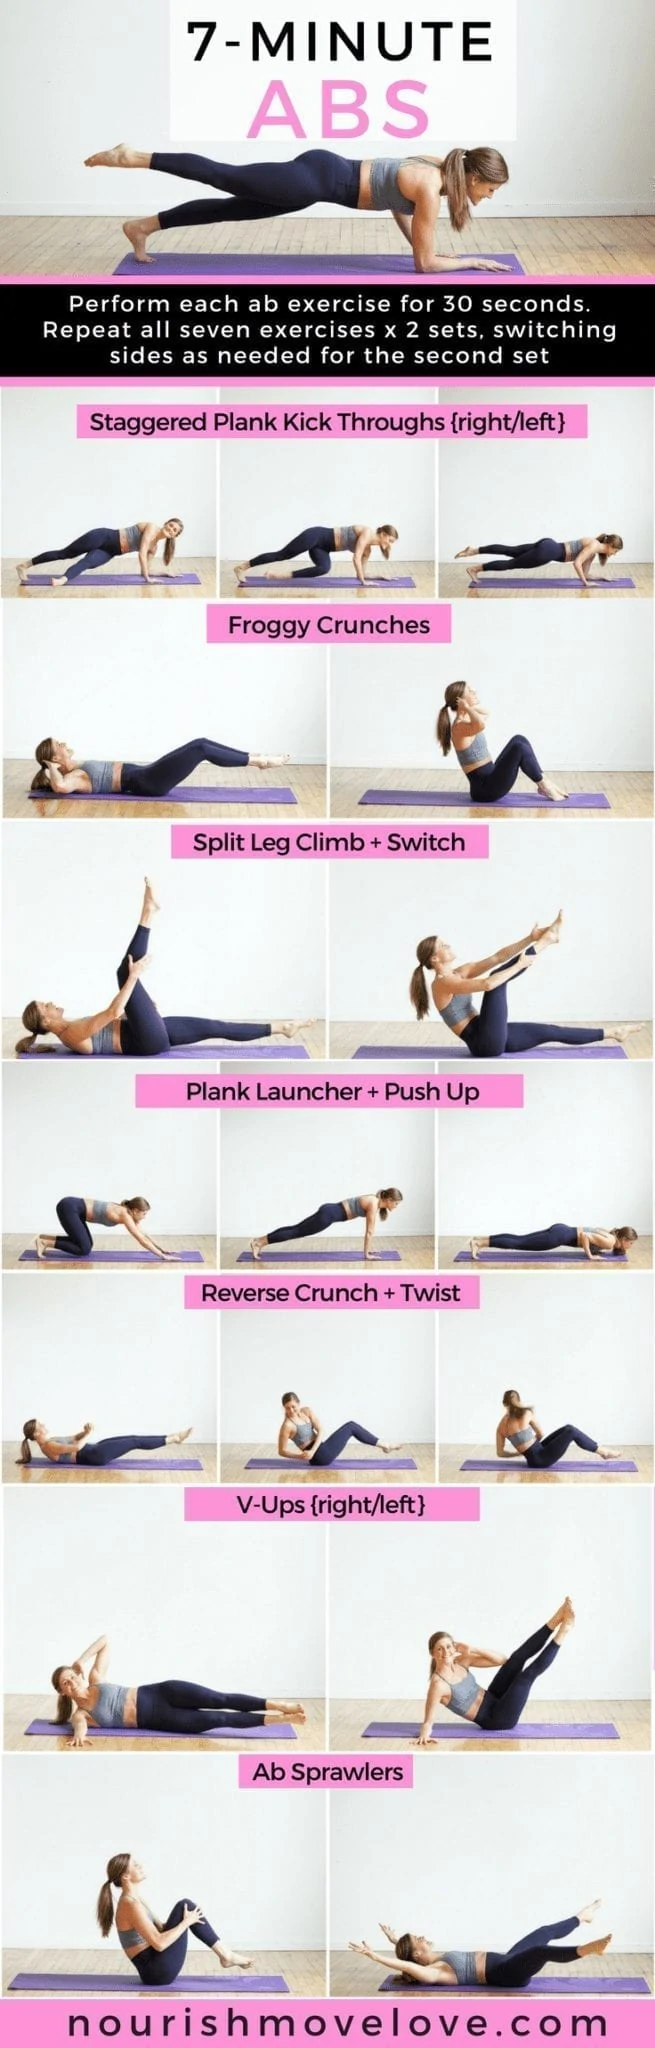 7-Minute Abs workouts for women 